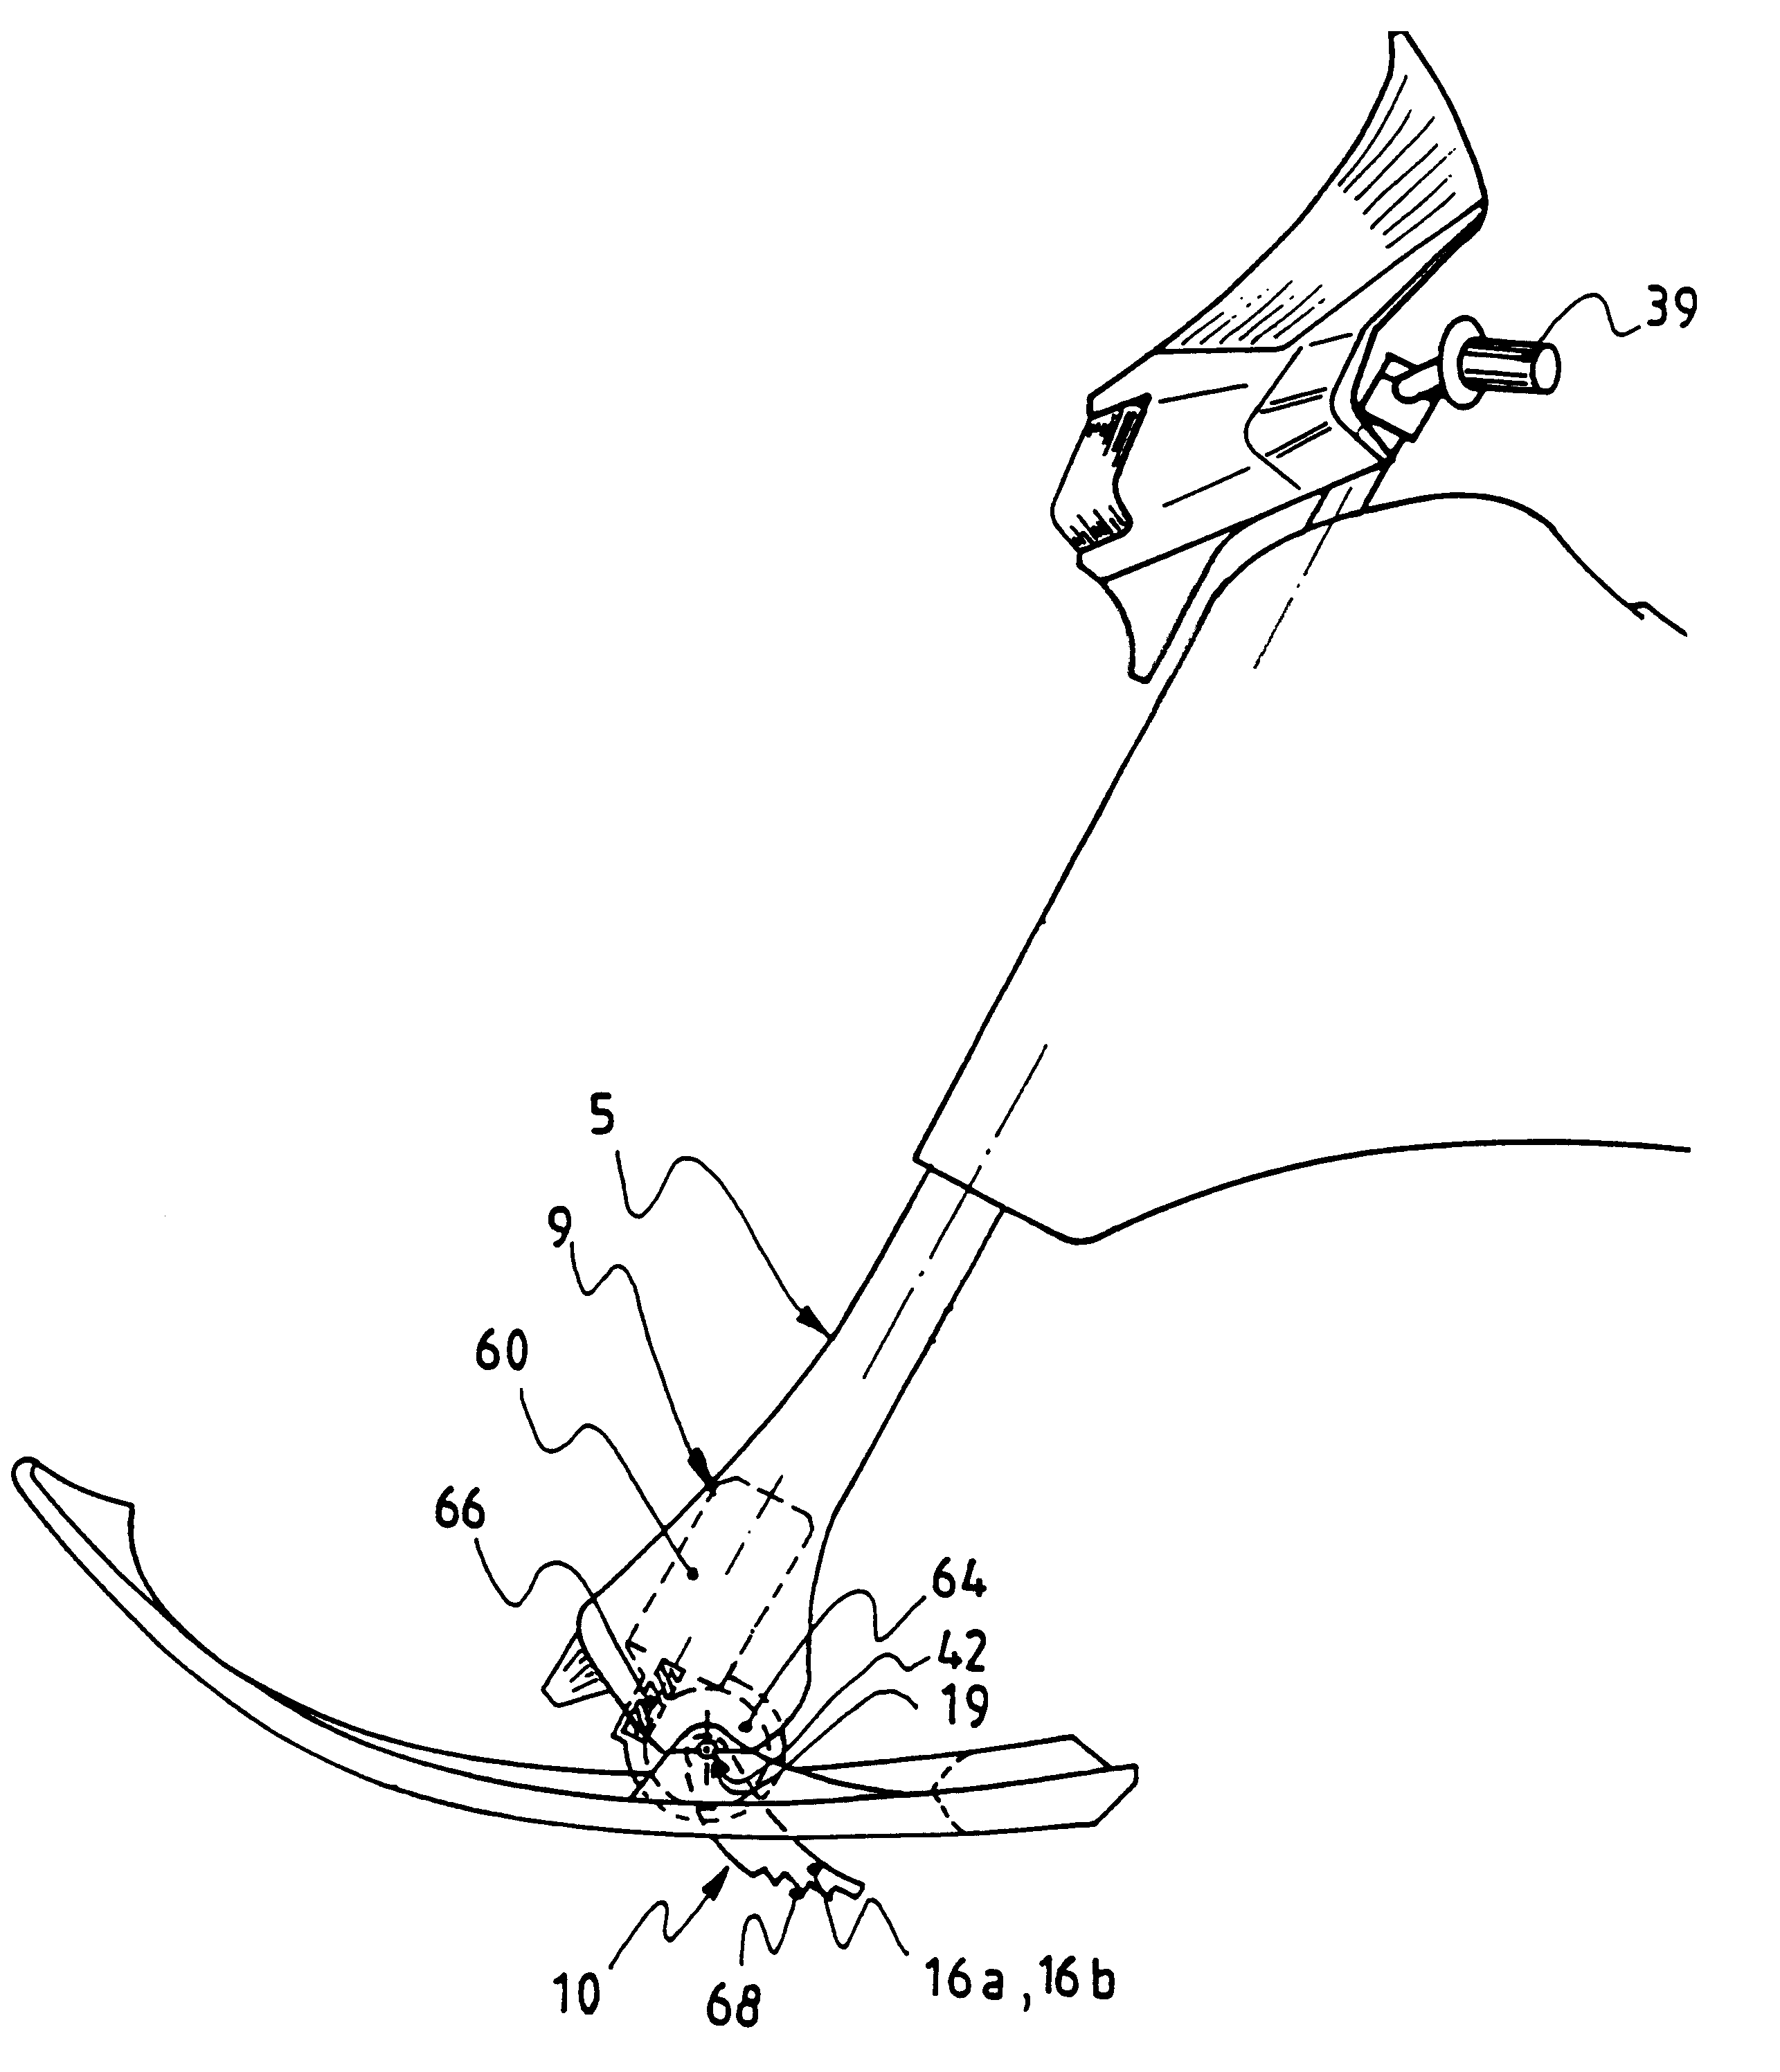 Braking device for a motorized snow vehicle